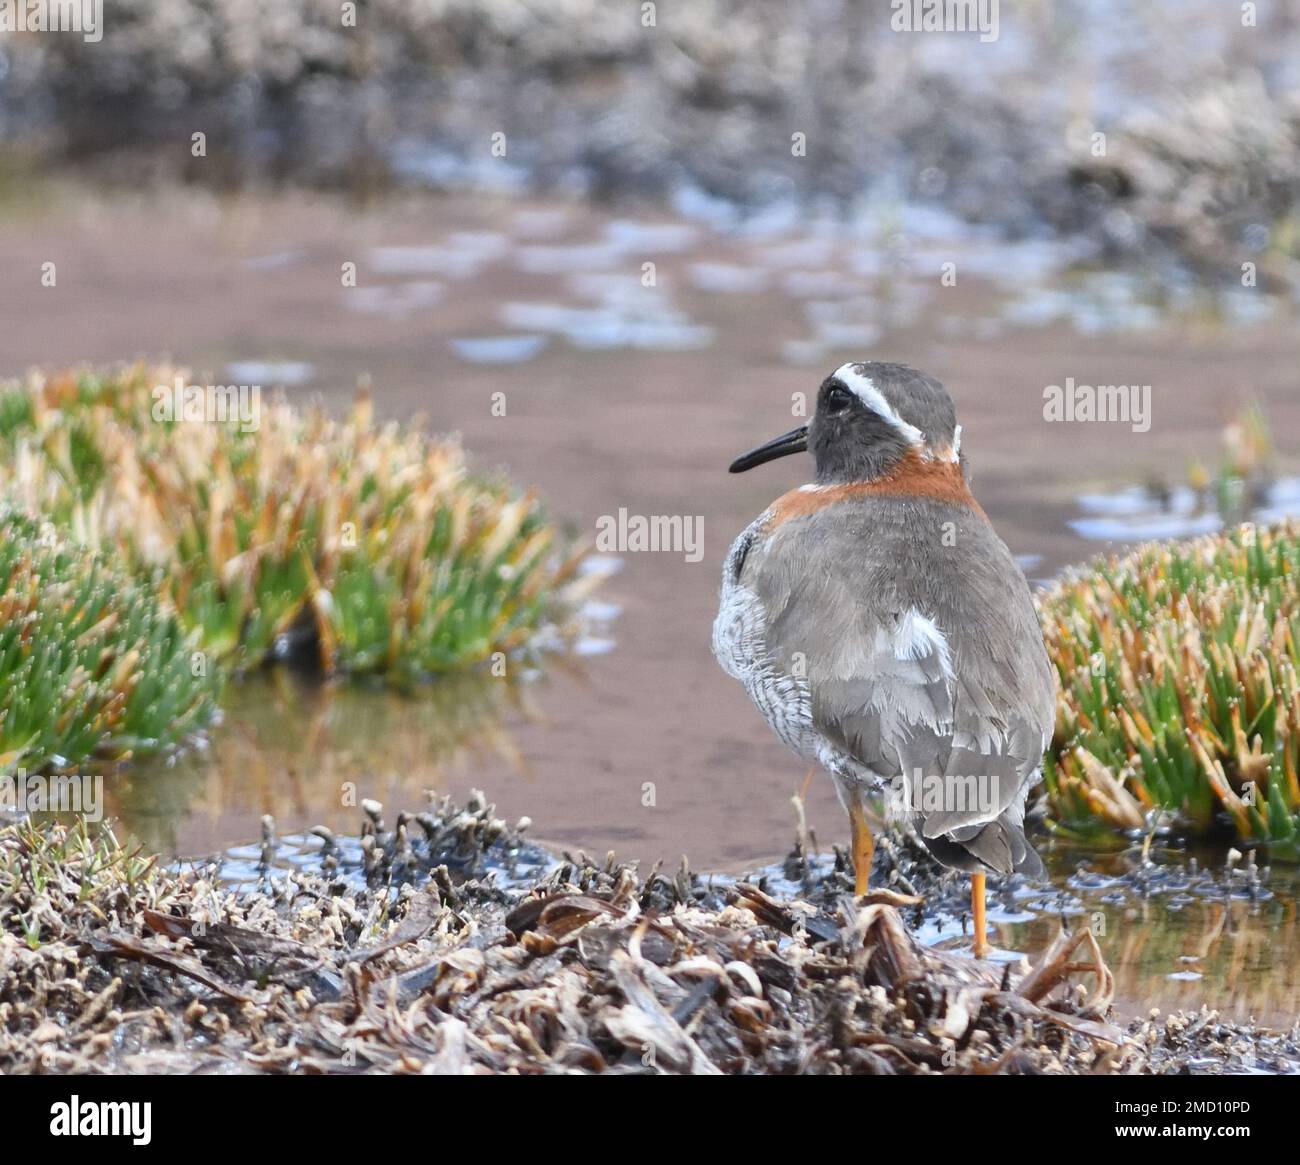 A near threatened diademed sandpiper-plover or diademed plover (Phegornis mitchellii) in boggy ground at about 5,000m in the Andes above San Mateo. Sa Stock Photo